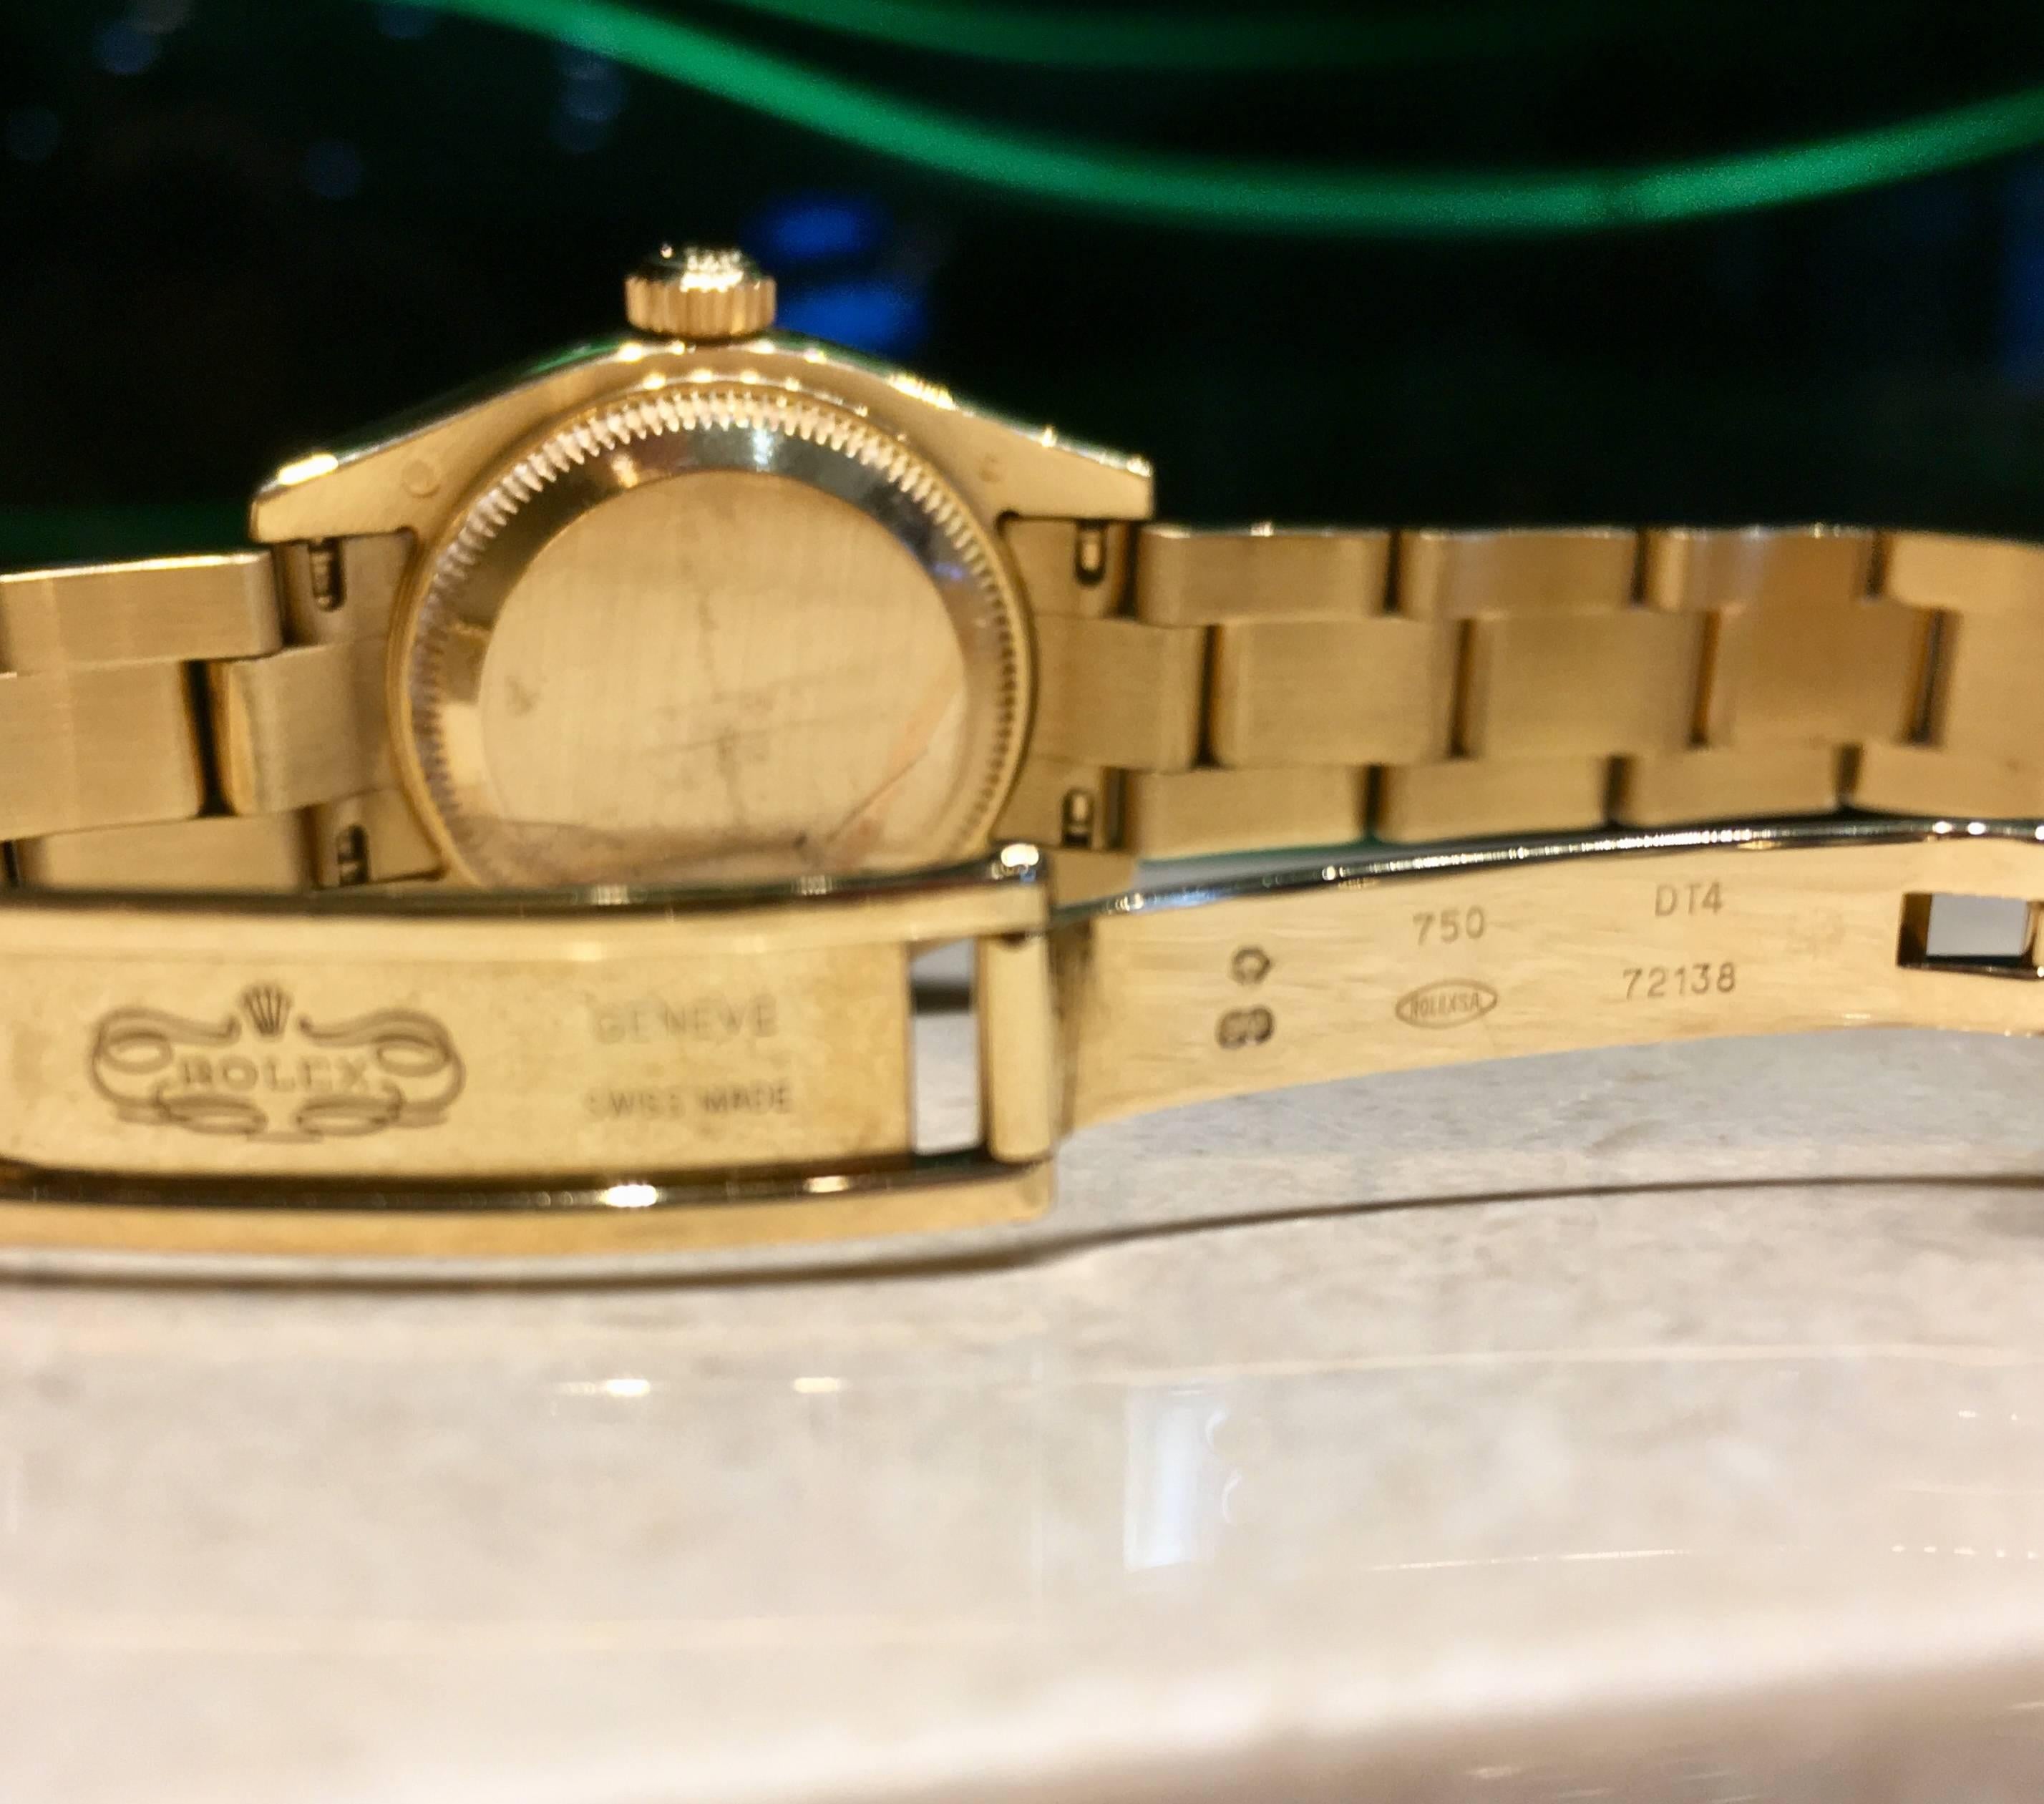 Rolex lady's 18k yellow gold Datejust estate wristwatch, Ref. 179178, 26mm, circa 2001, mother of pearl dial with roman numerals, oyster bracelet, inside bracelet measurement is approximately 6.25 inches, 10 links, classic fluted bezel, automatic